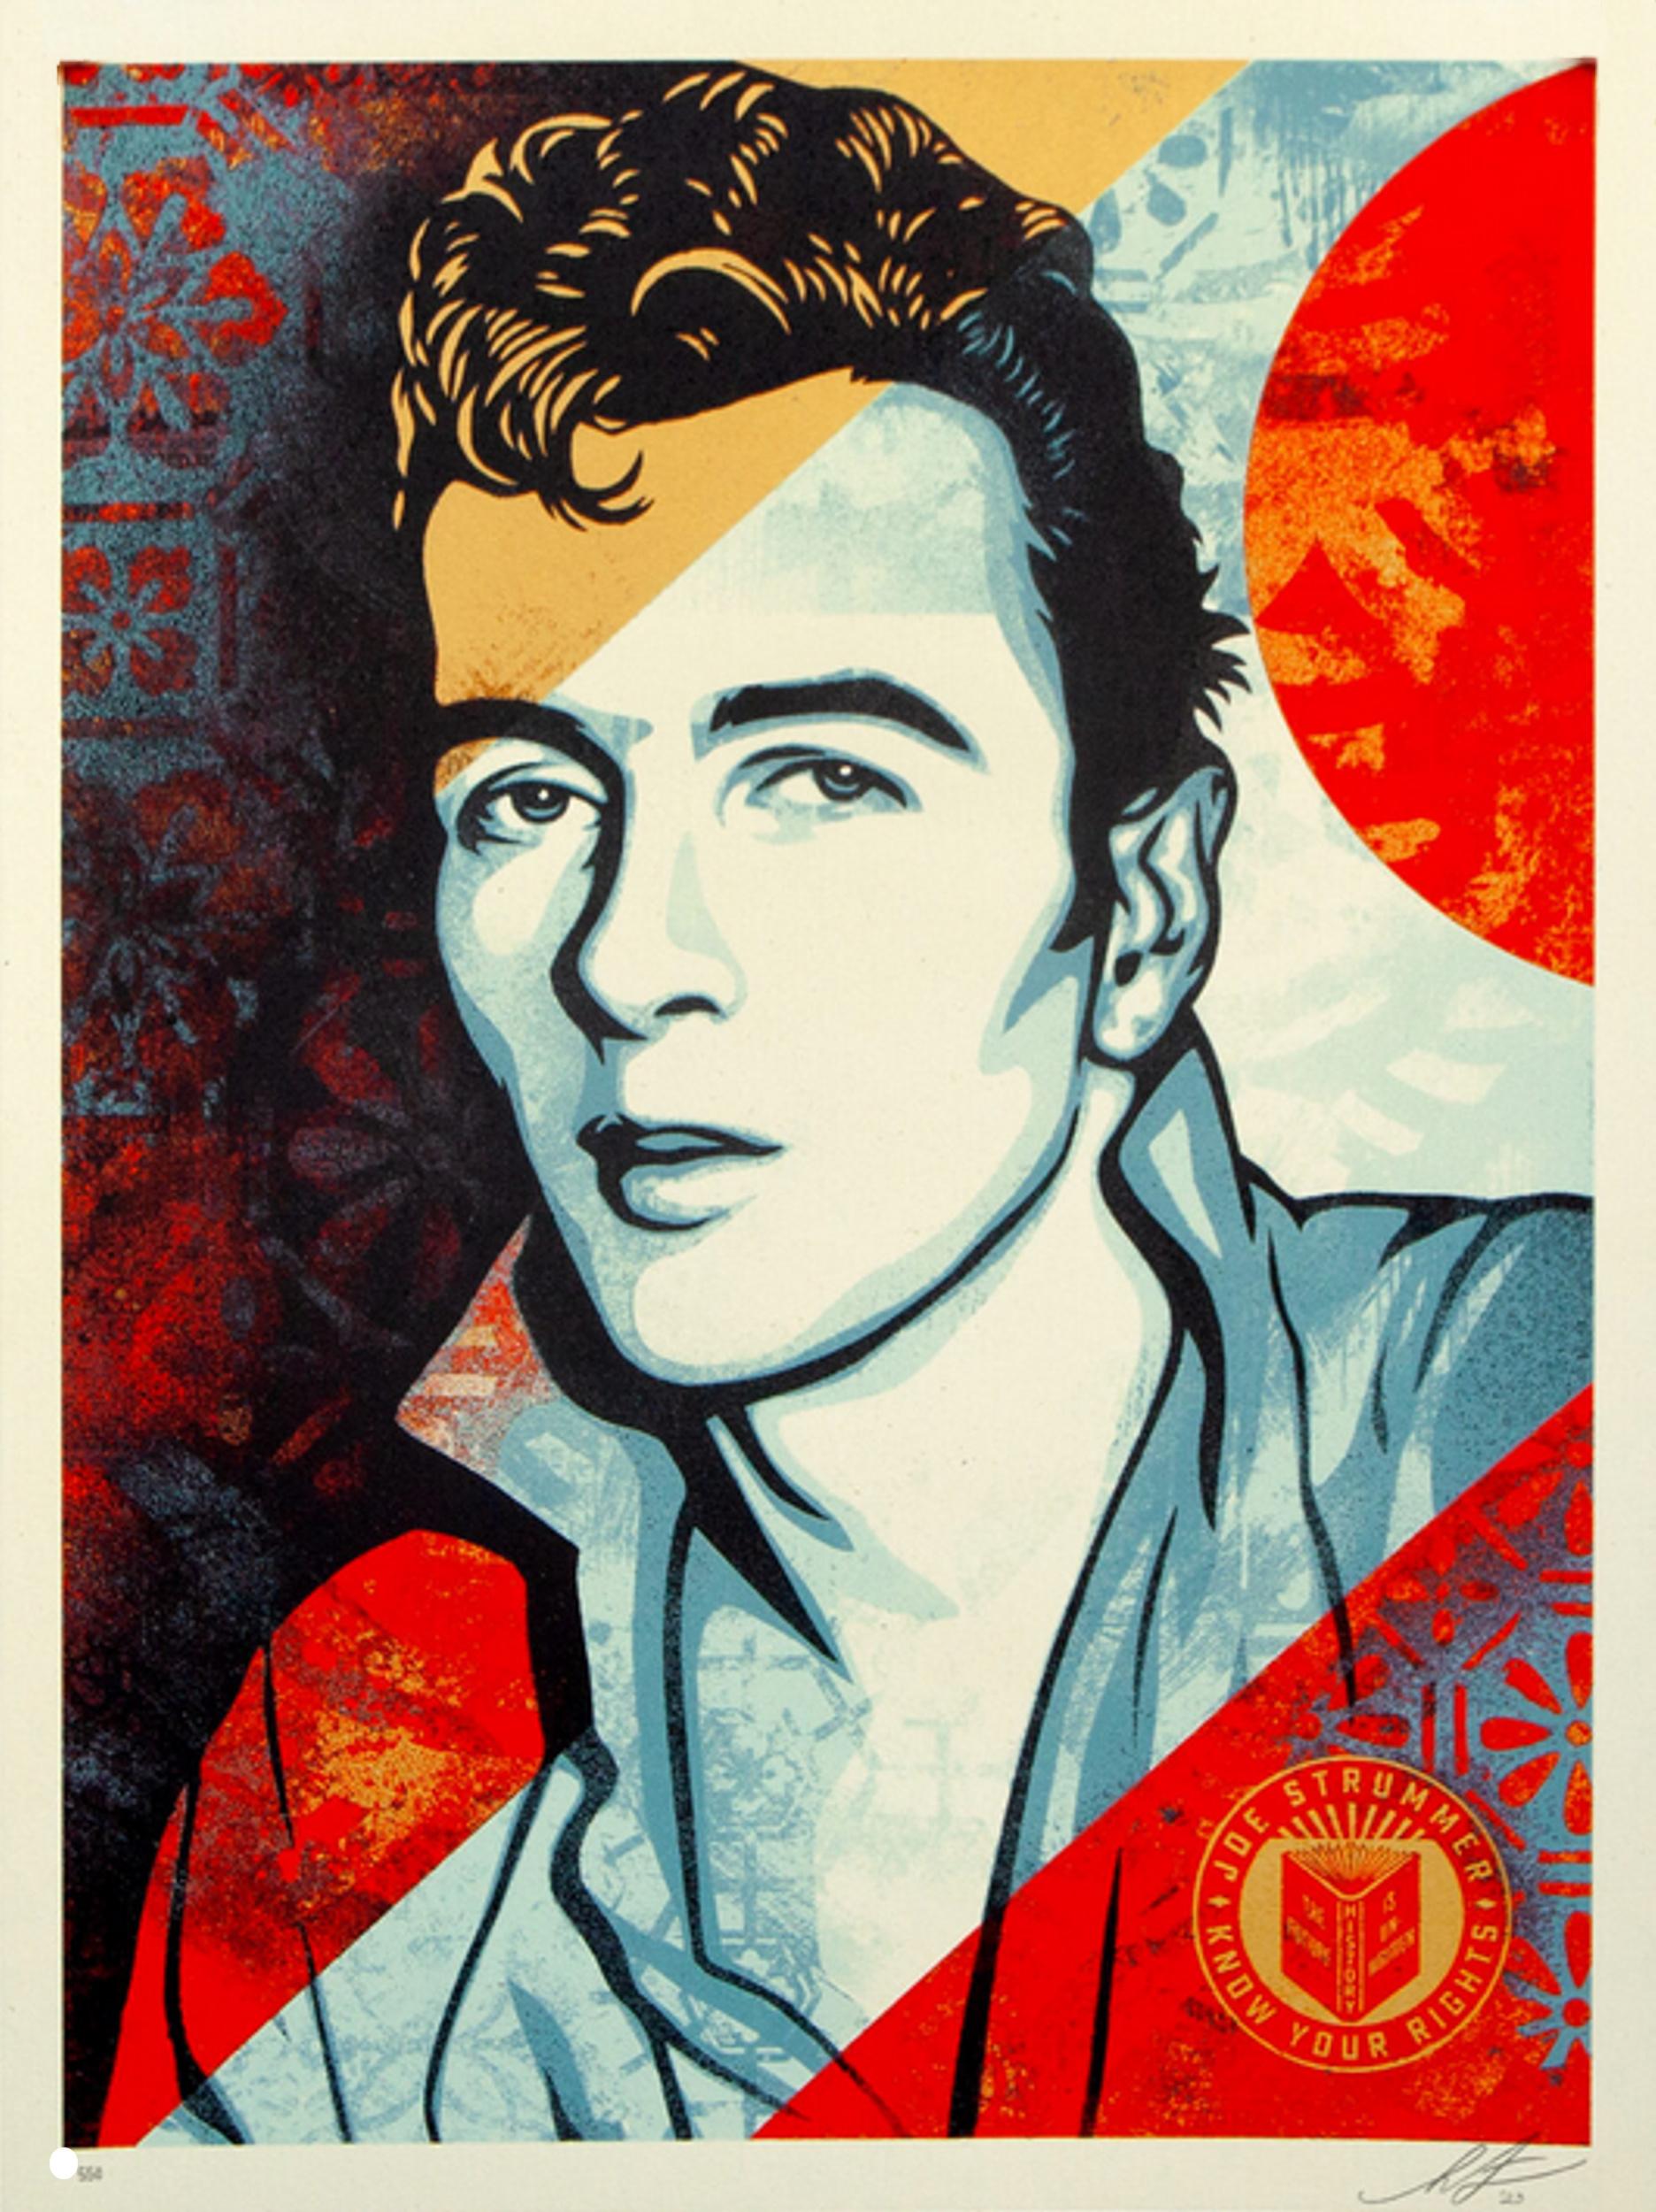 Joe Strummer – Know Your Rights (The Clash, Philosophical, Icon, Punk, 50% OFF) - Print by Shepard Fairey